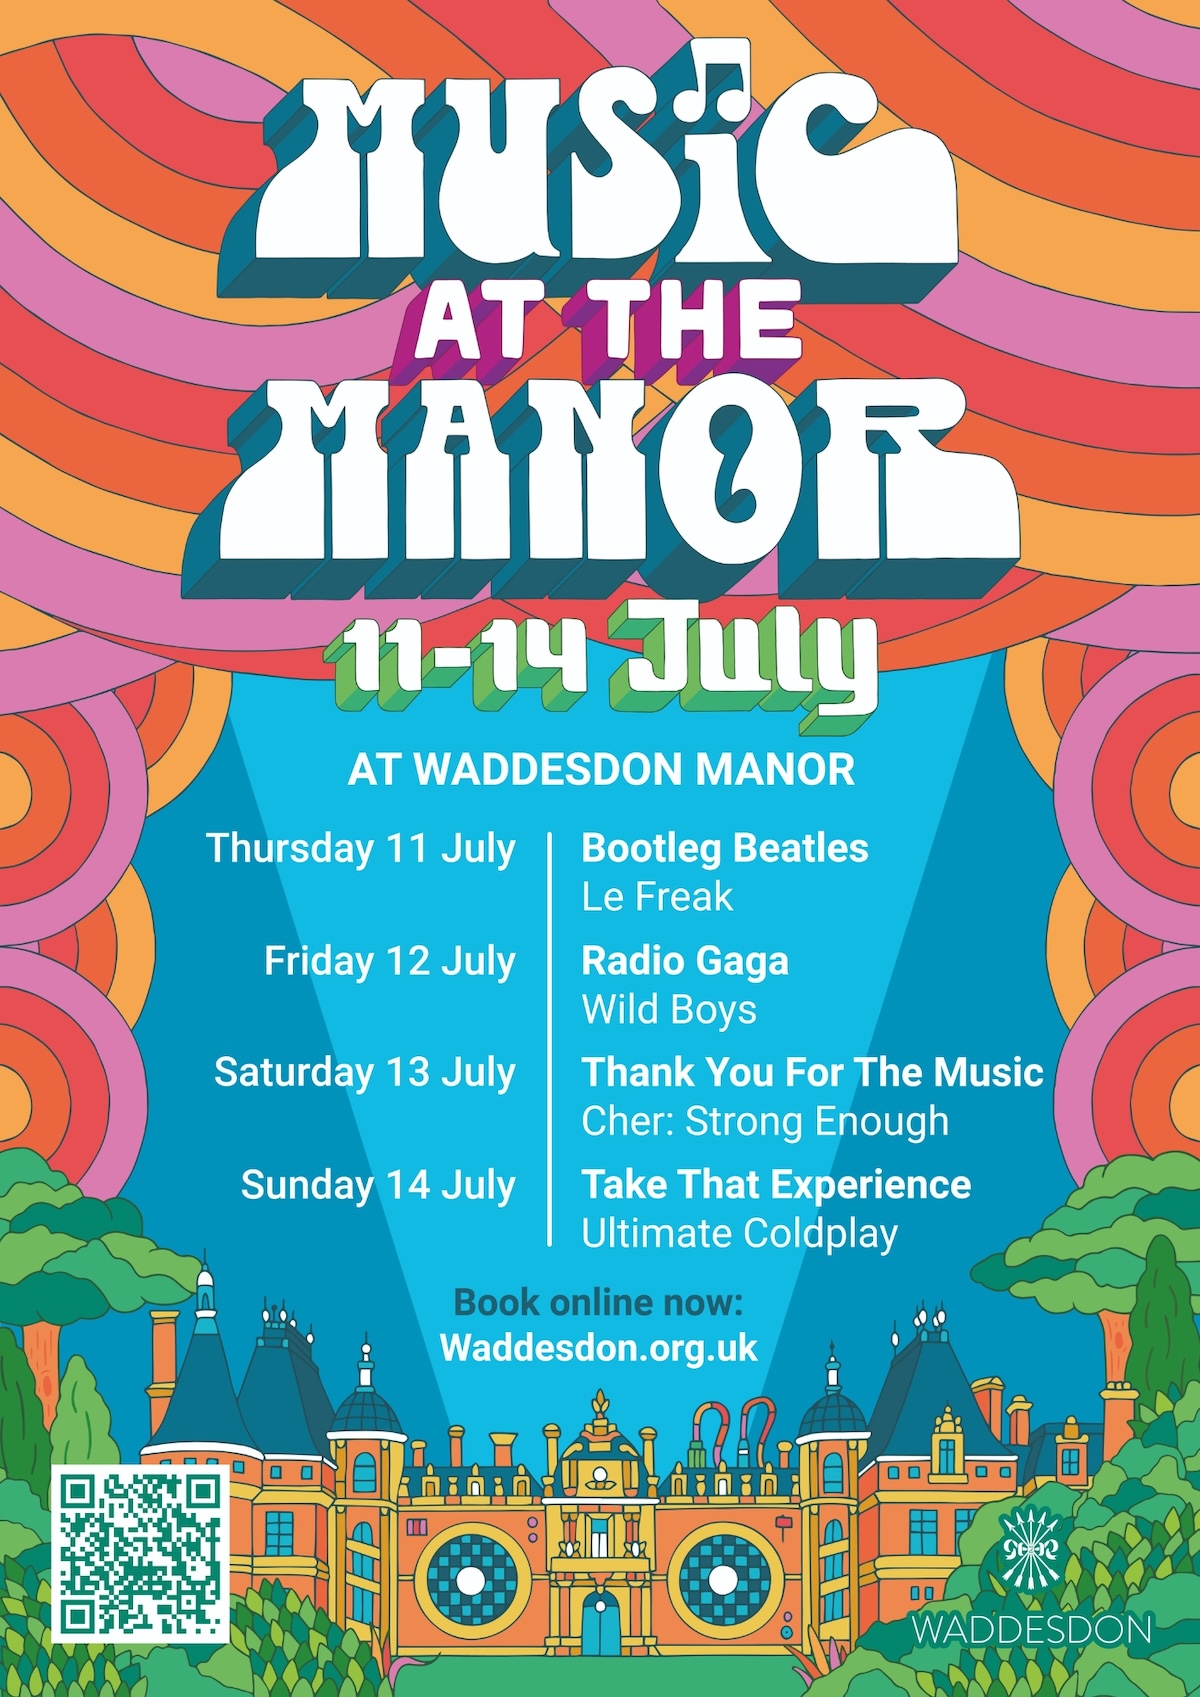 Experience Music at the Manor at Waddesdon this July 11-14 with the world's best tribute acts including The Beatles, Queen, ABBA, Take That, and Coldplay.